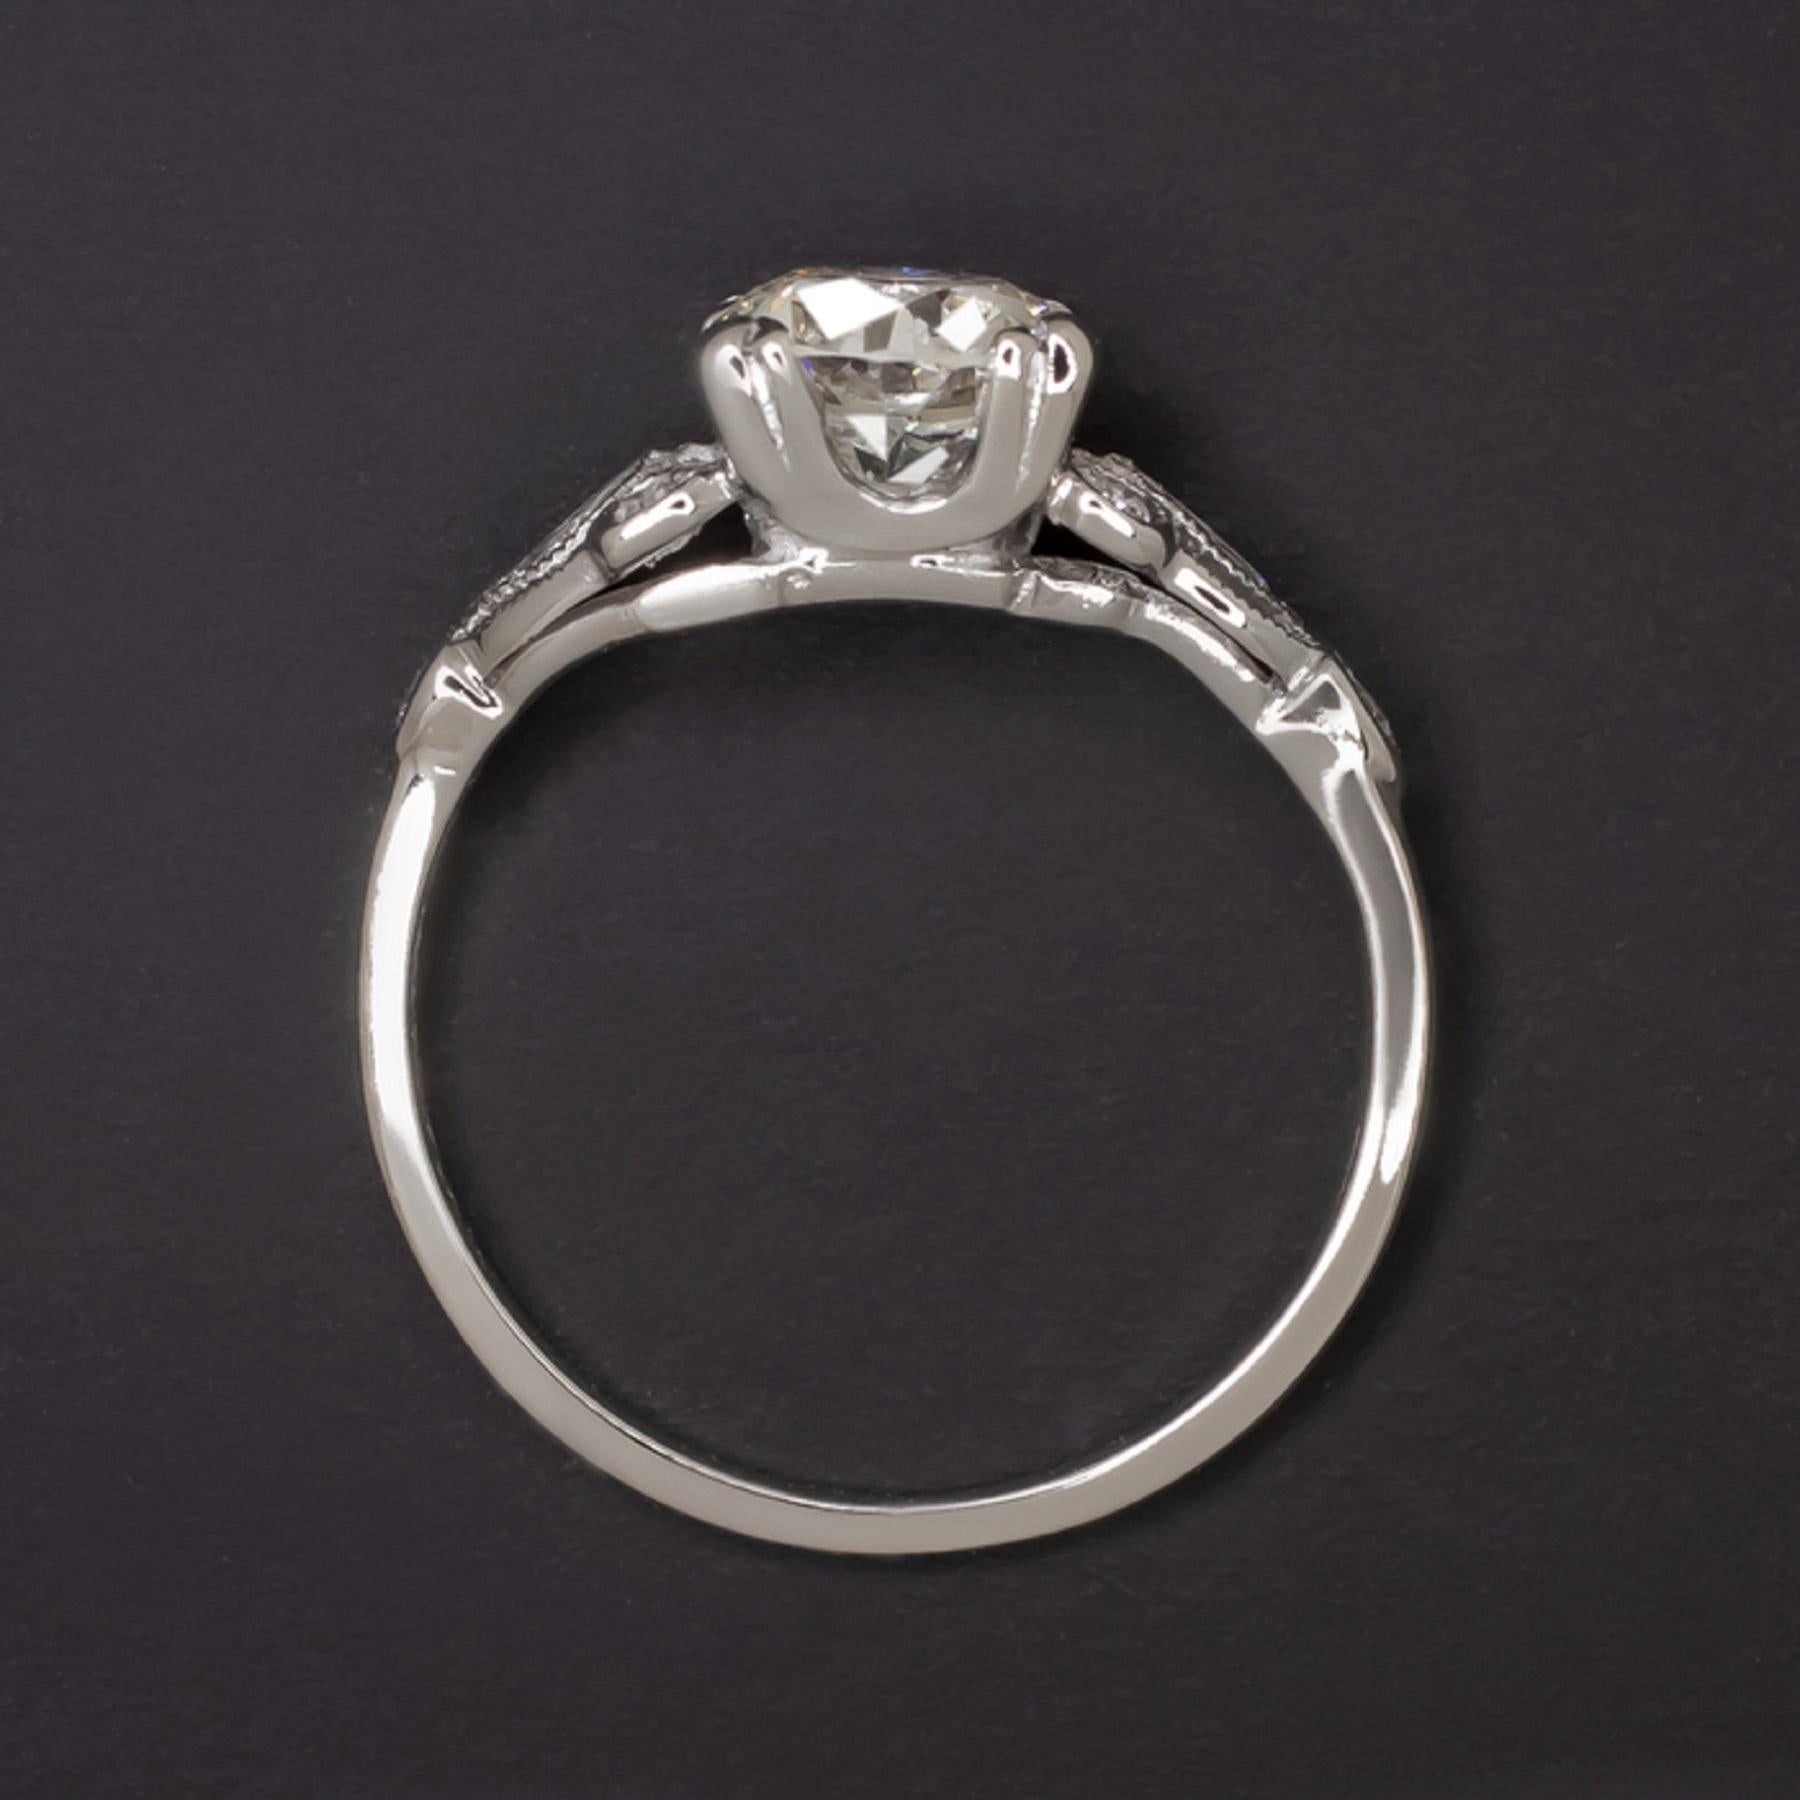 Art Deco engagement ring features a fiery 0.88ct old European cut diamond complemented by a glittering, diamond studded platinum setting. Beautifully white and completely eye clean, the center diamond has a vibrant look and an eye catching presence.